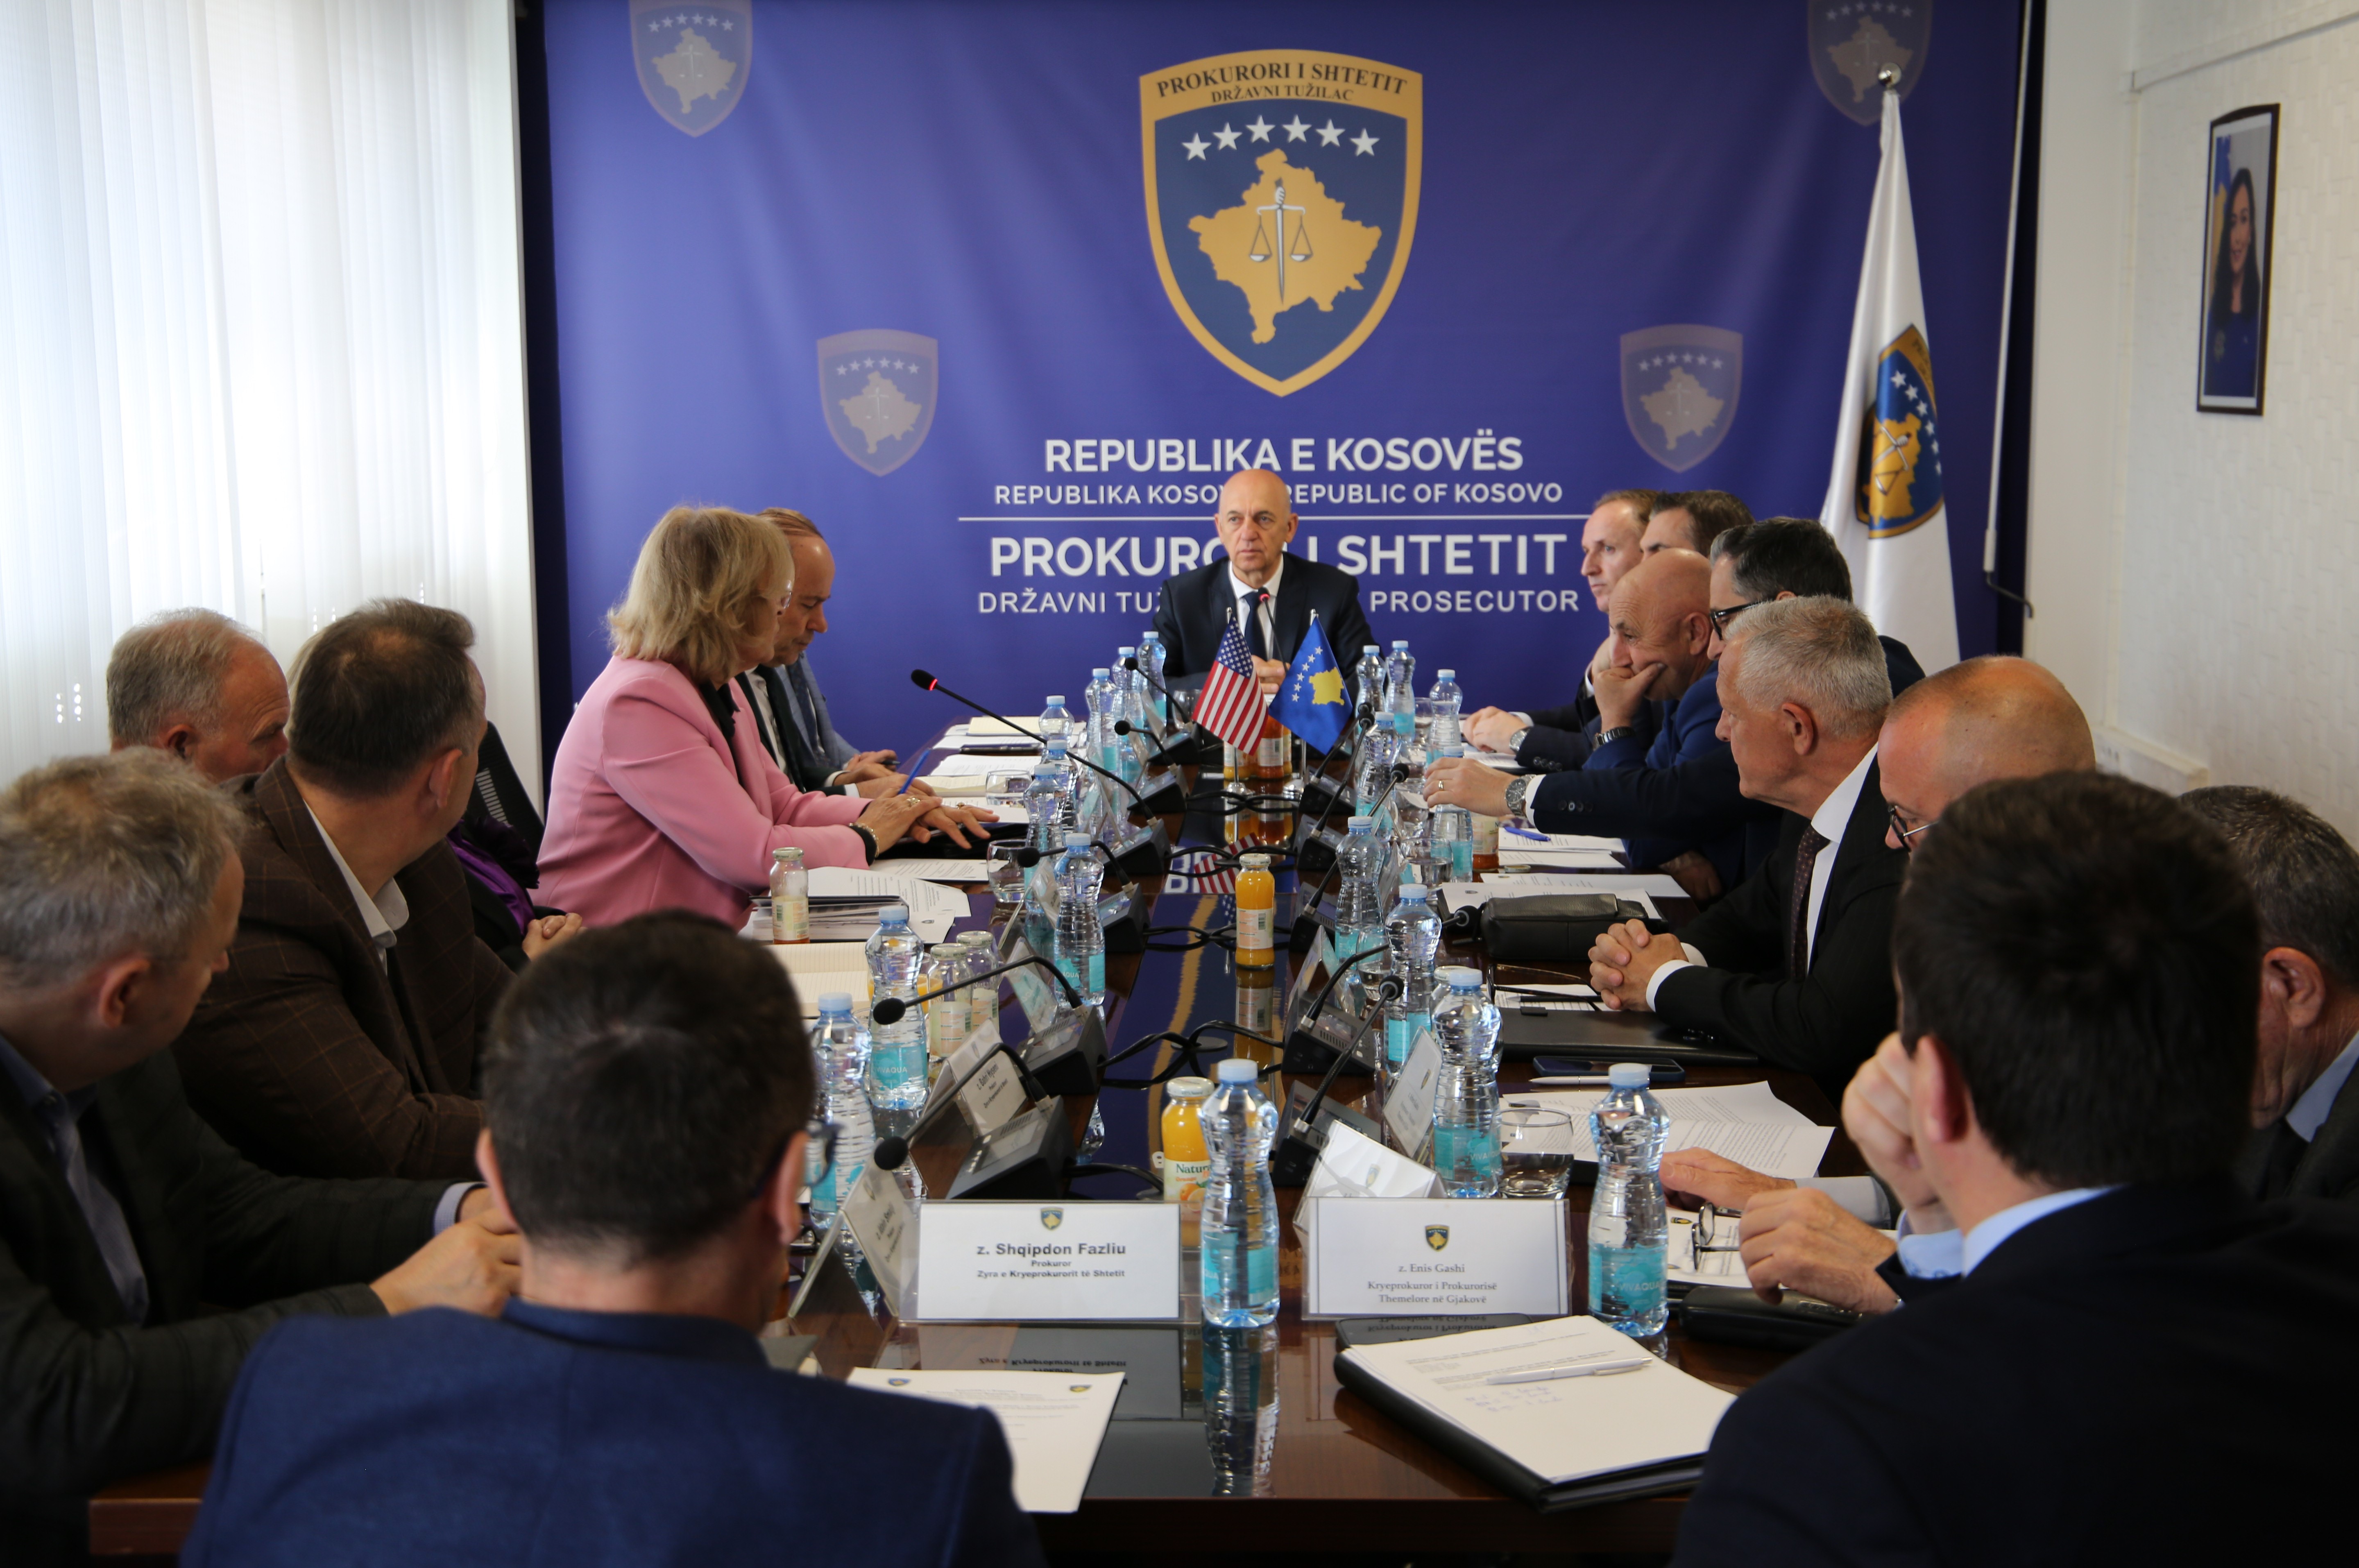 Dealing with cases of domestic violence and corruption was the focal point of discussion during a meeting between the Acting Chief State Prosecutor, Mr. Besim Kelmendi, and the Chief Prosecutors of all prosecution offices in the country